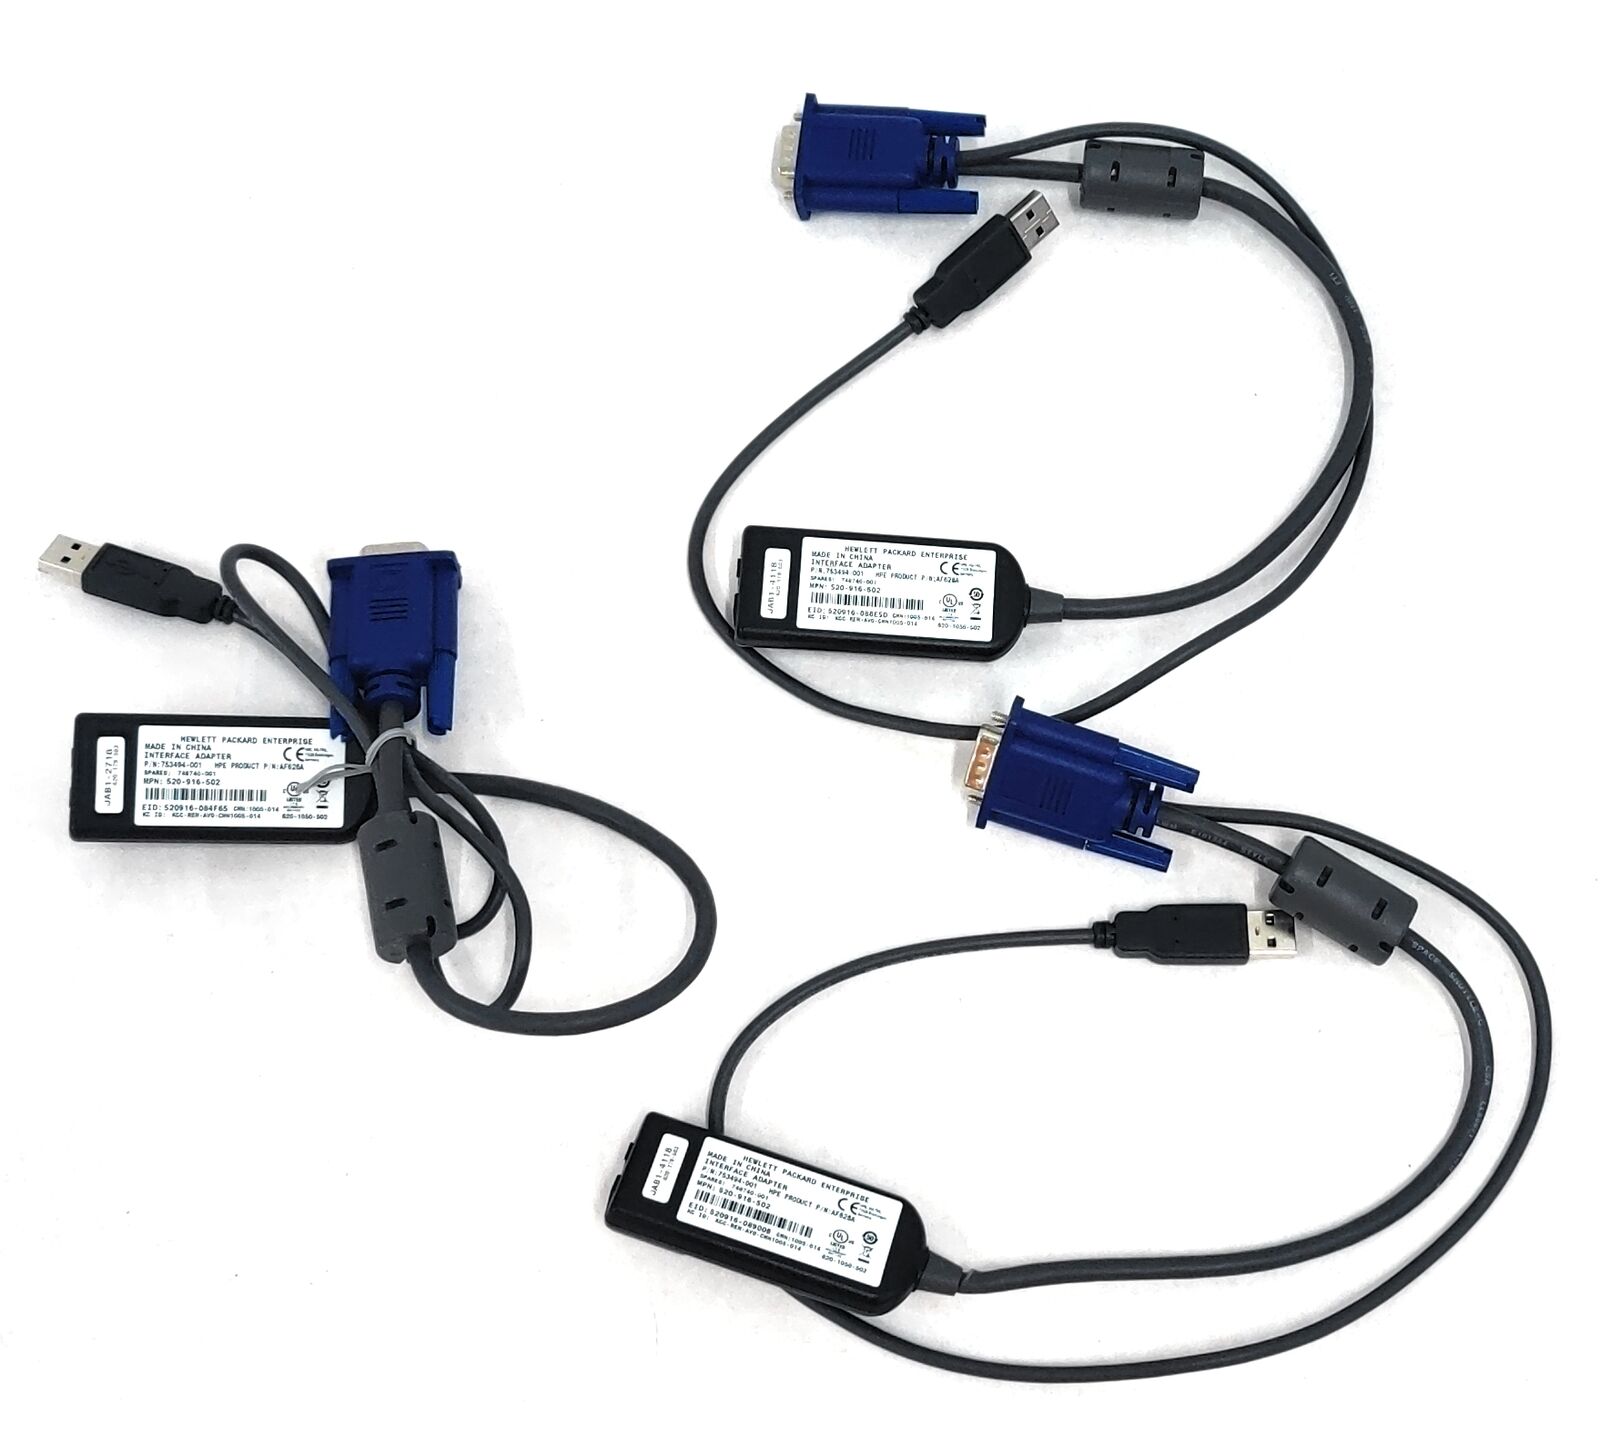 Lot of 3 HP AF628A 520-916-502 USB KVM Switch Virtual Media Module Cable POD